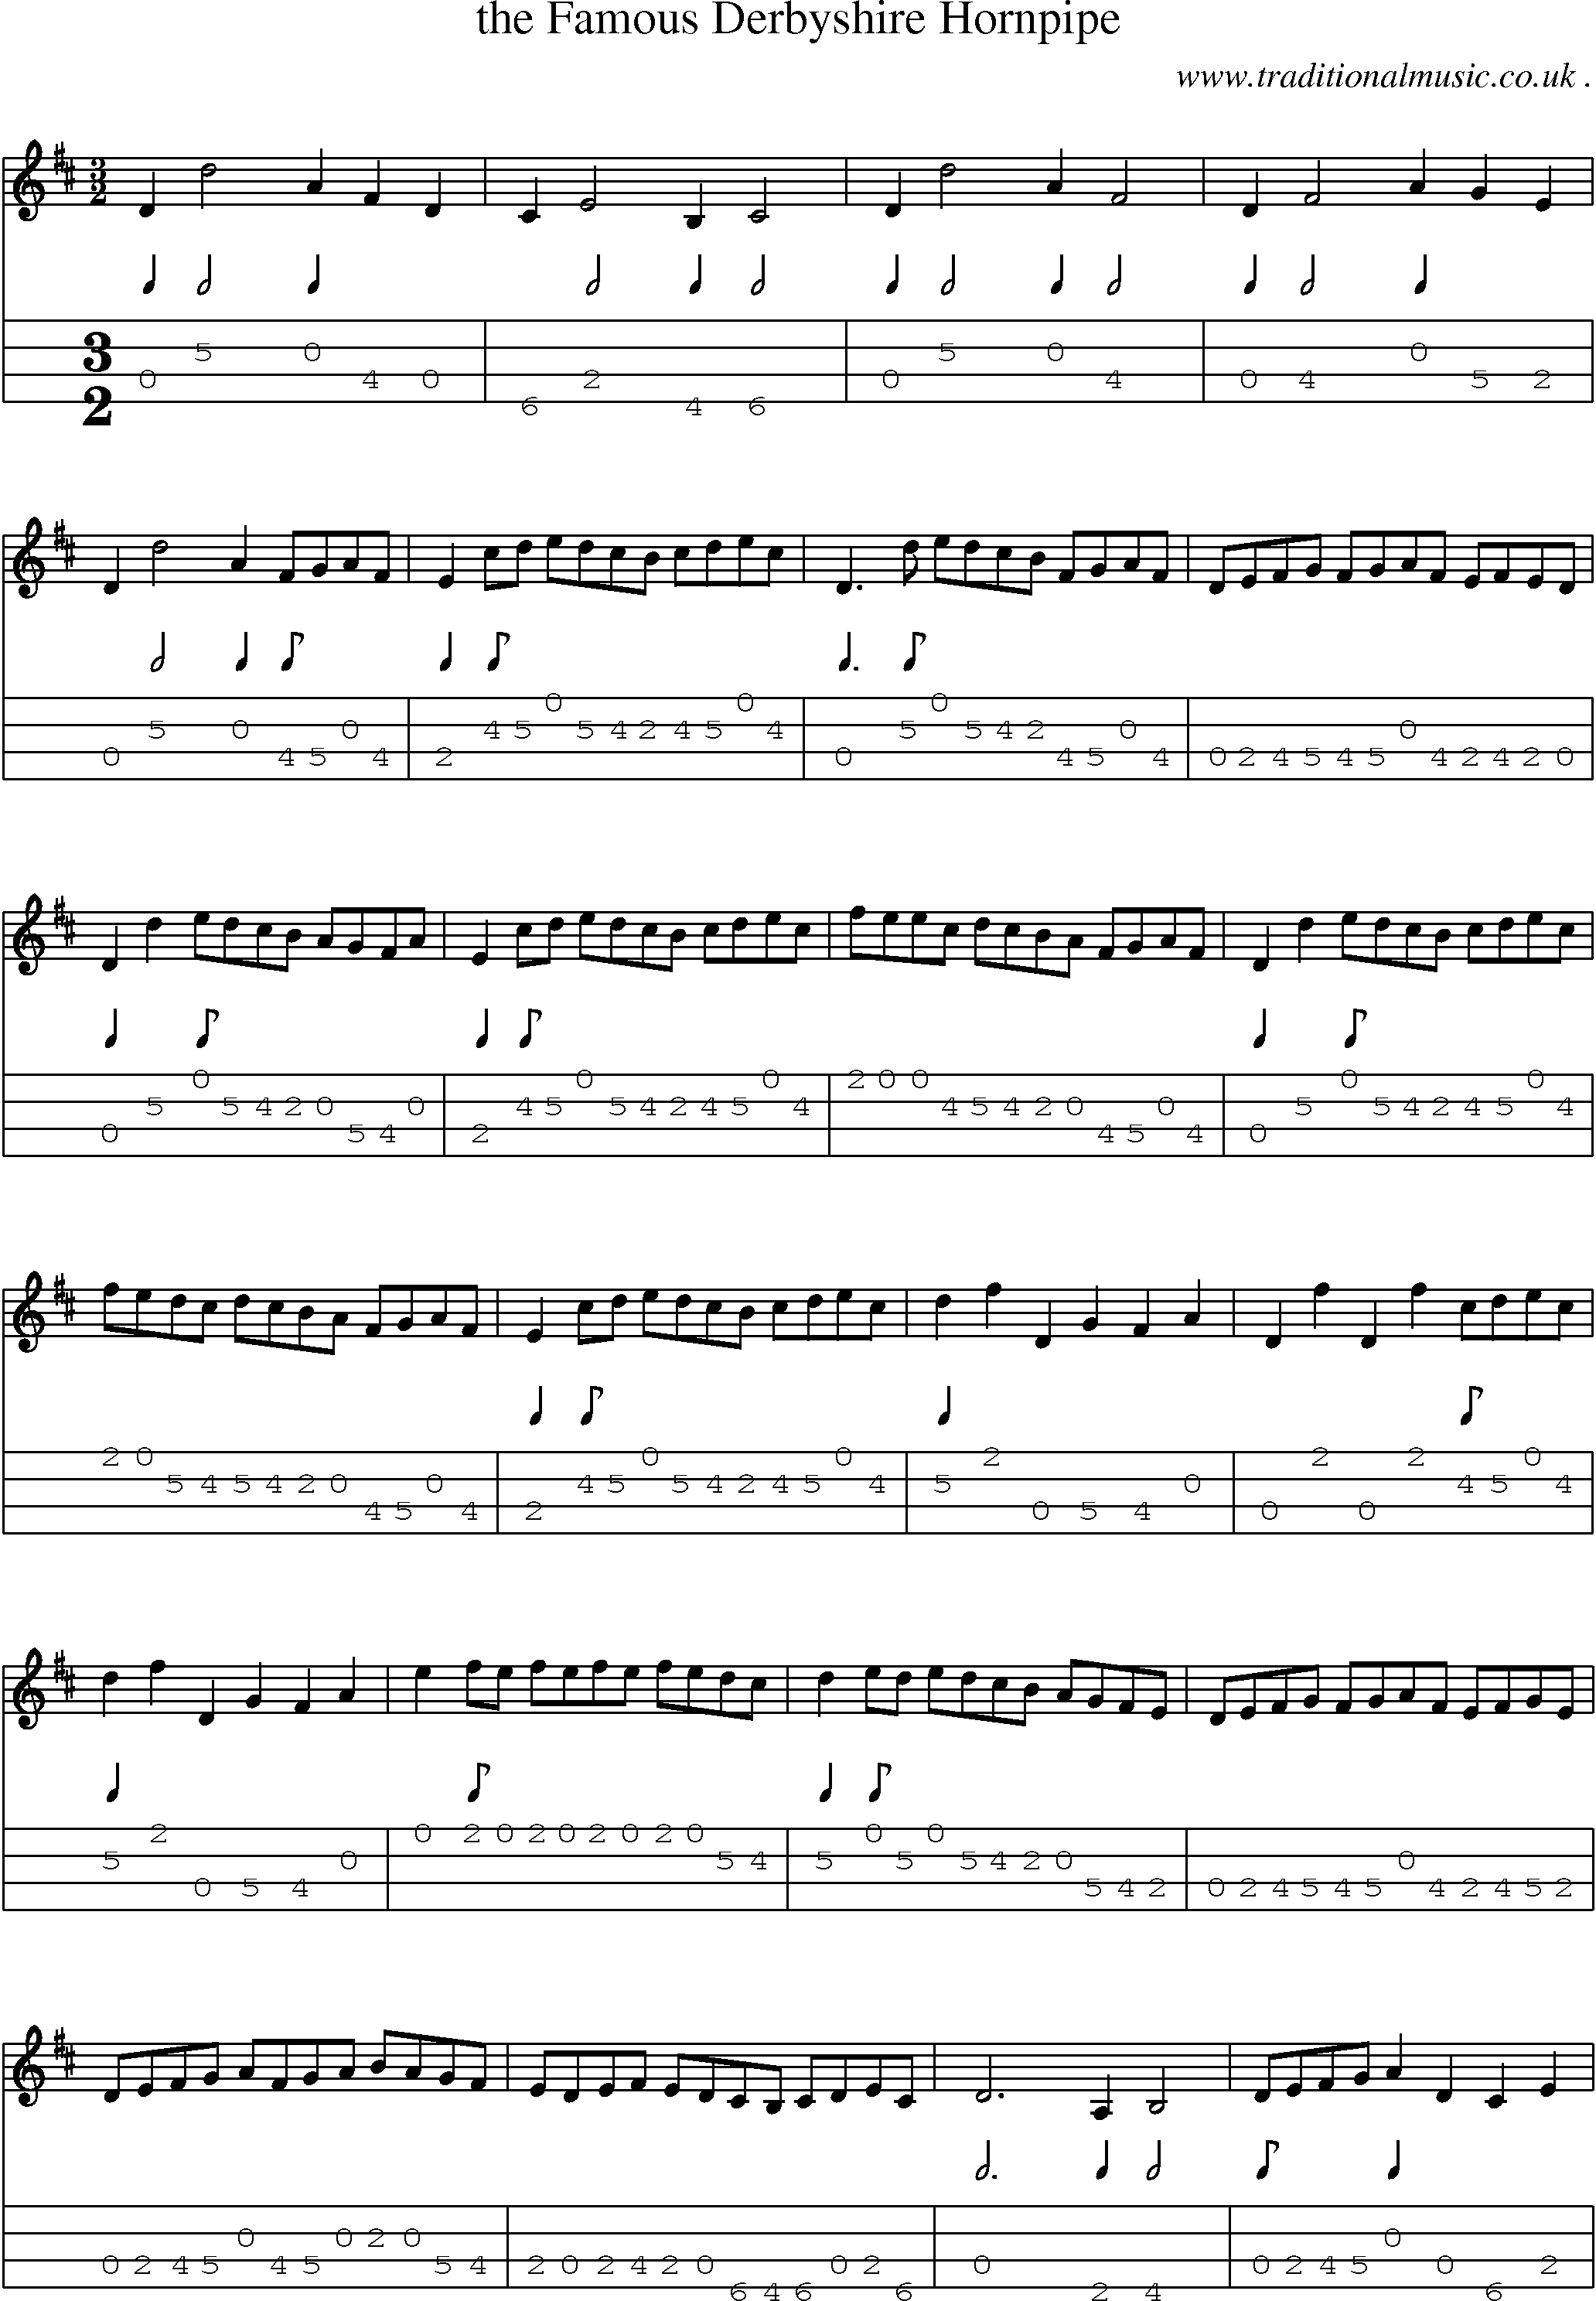 Sheet-Music and Mandolin Tabs for The Famous Derbyshire Hornpipe